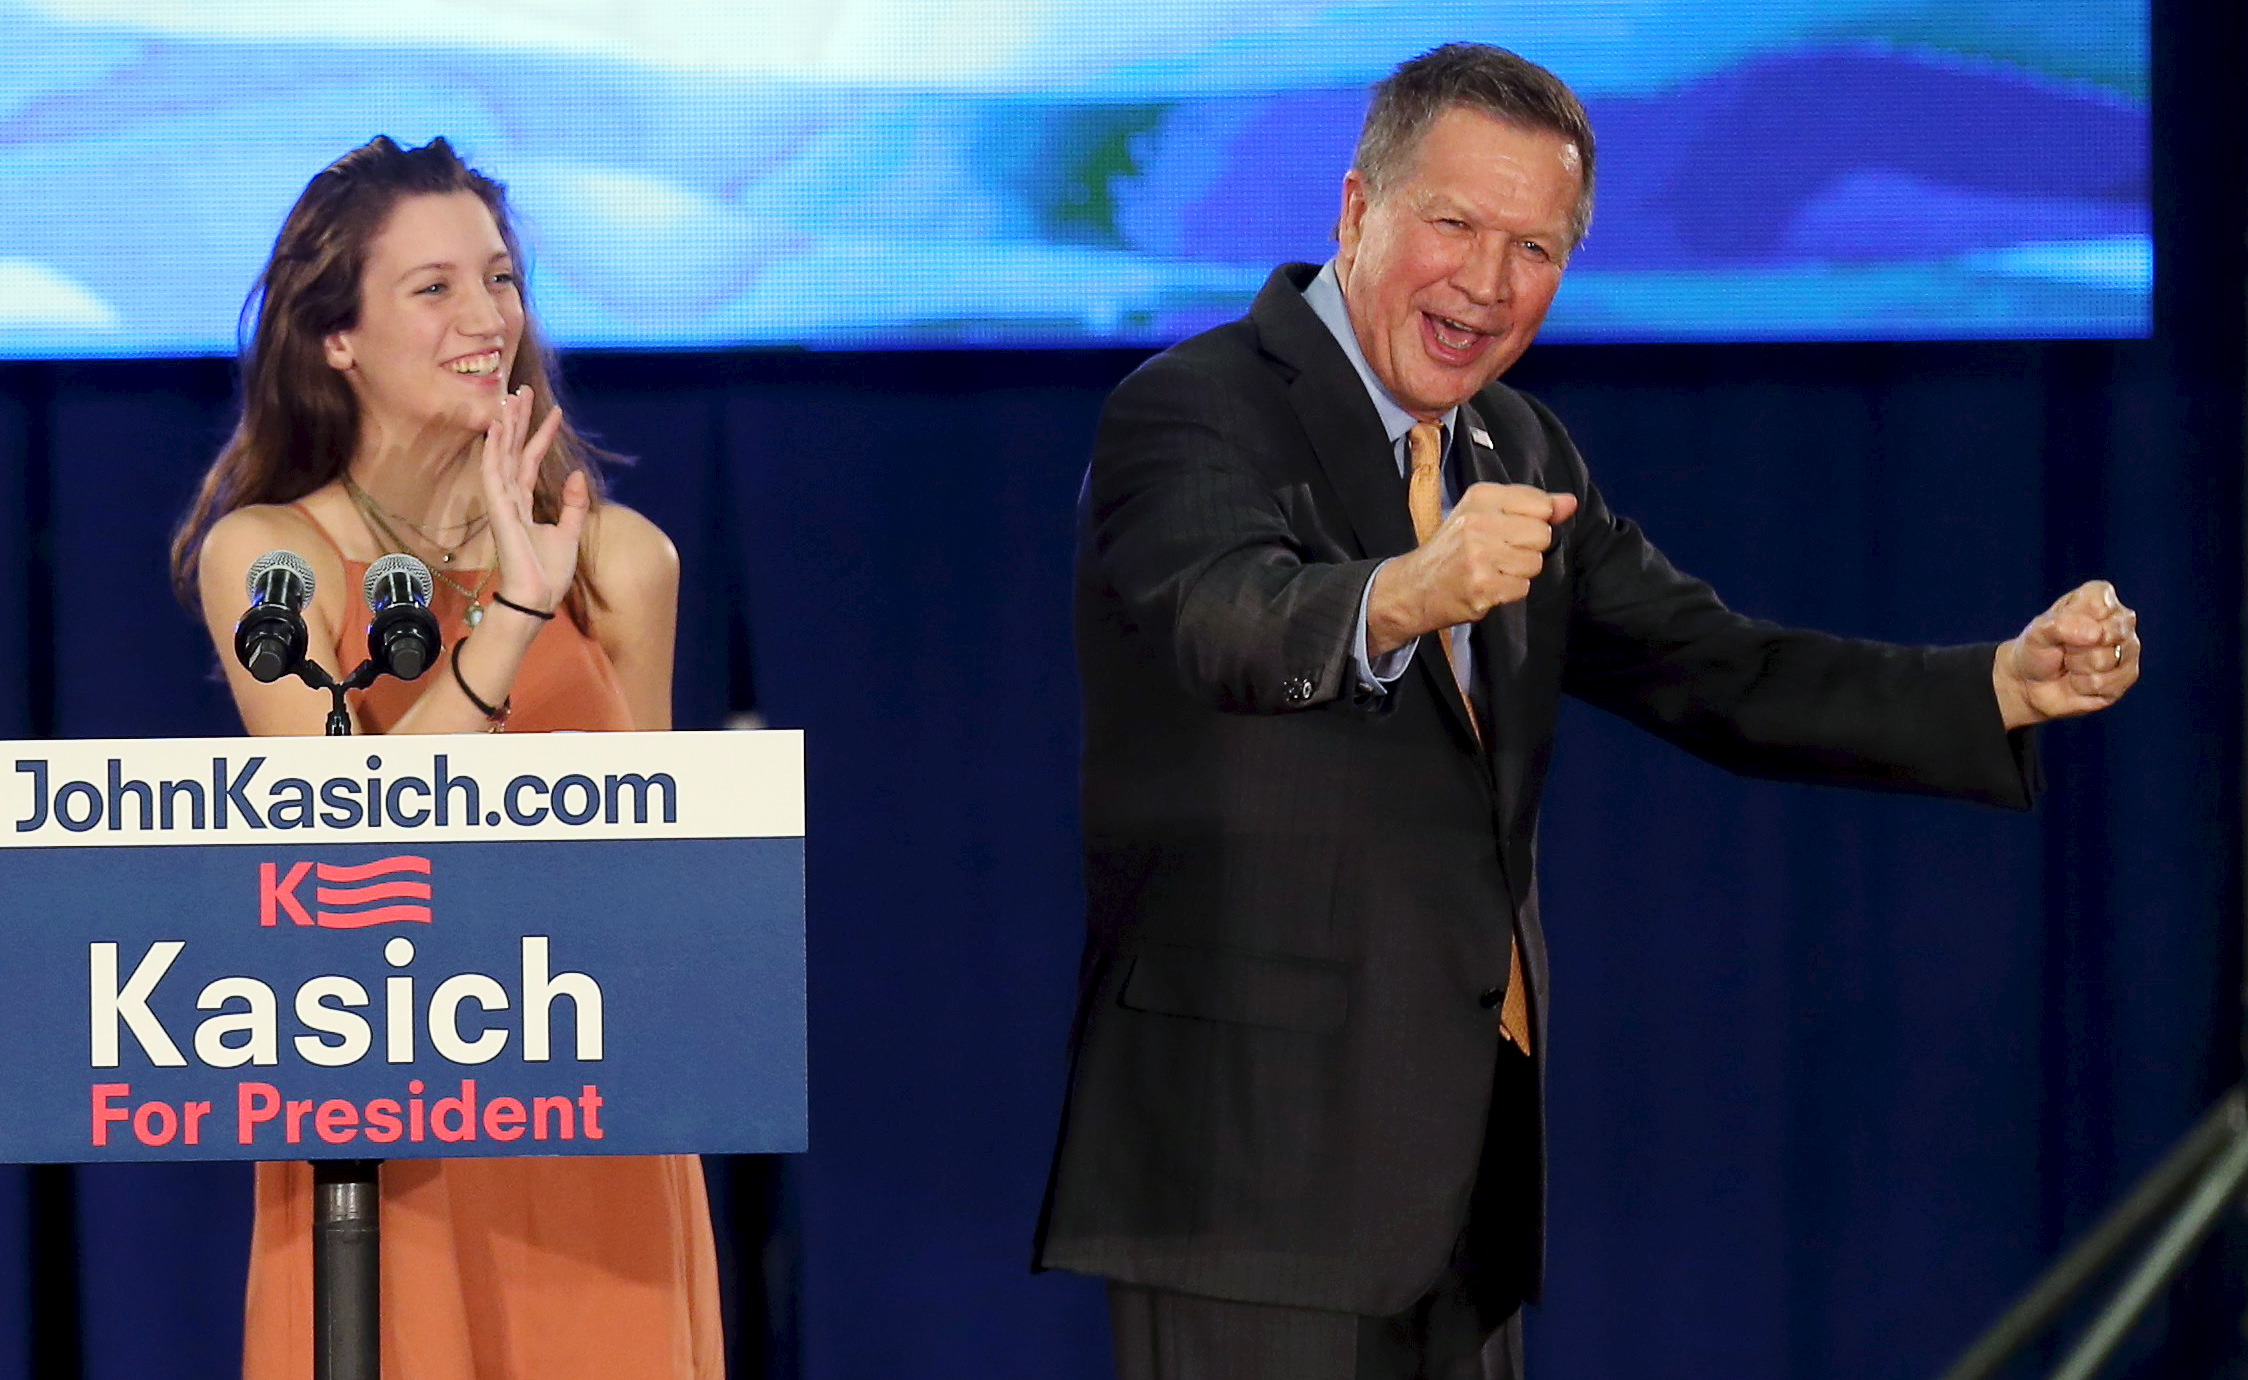 Republican U.S. presidental candidate Governor John Kasich celebrates his win in the Ohio primary election next to his daughter Rees during a campaign rally in Berea